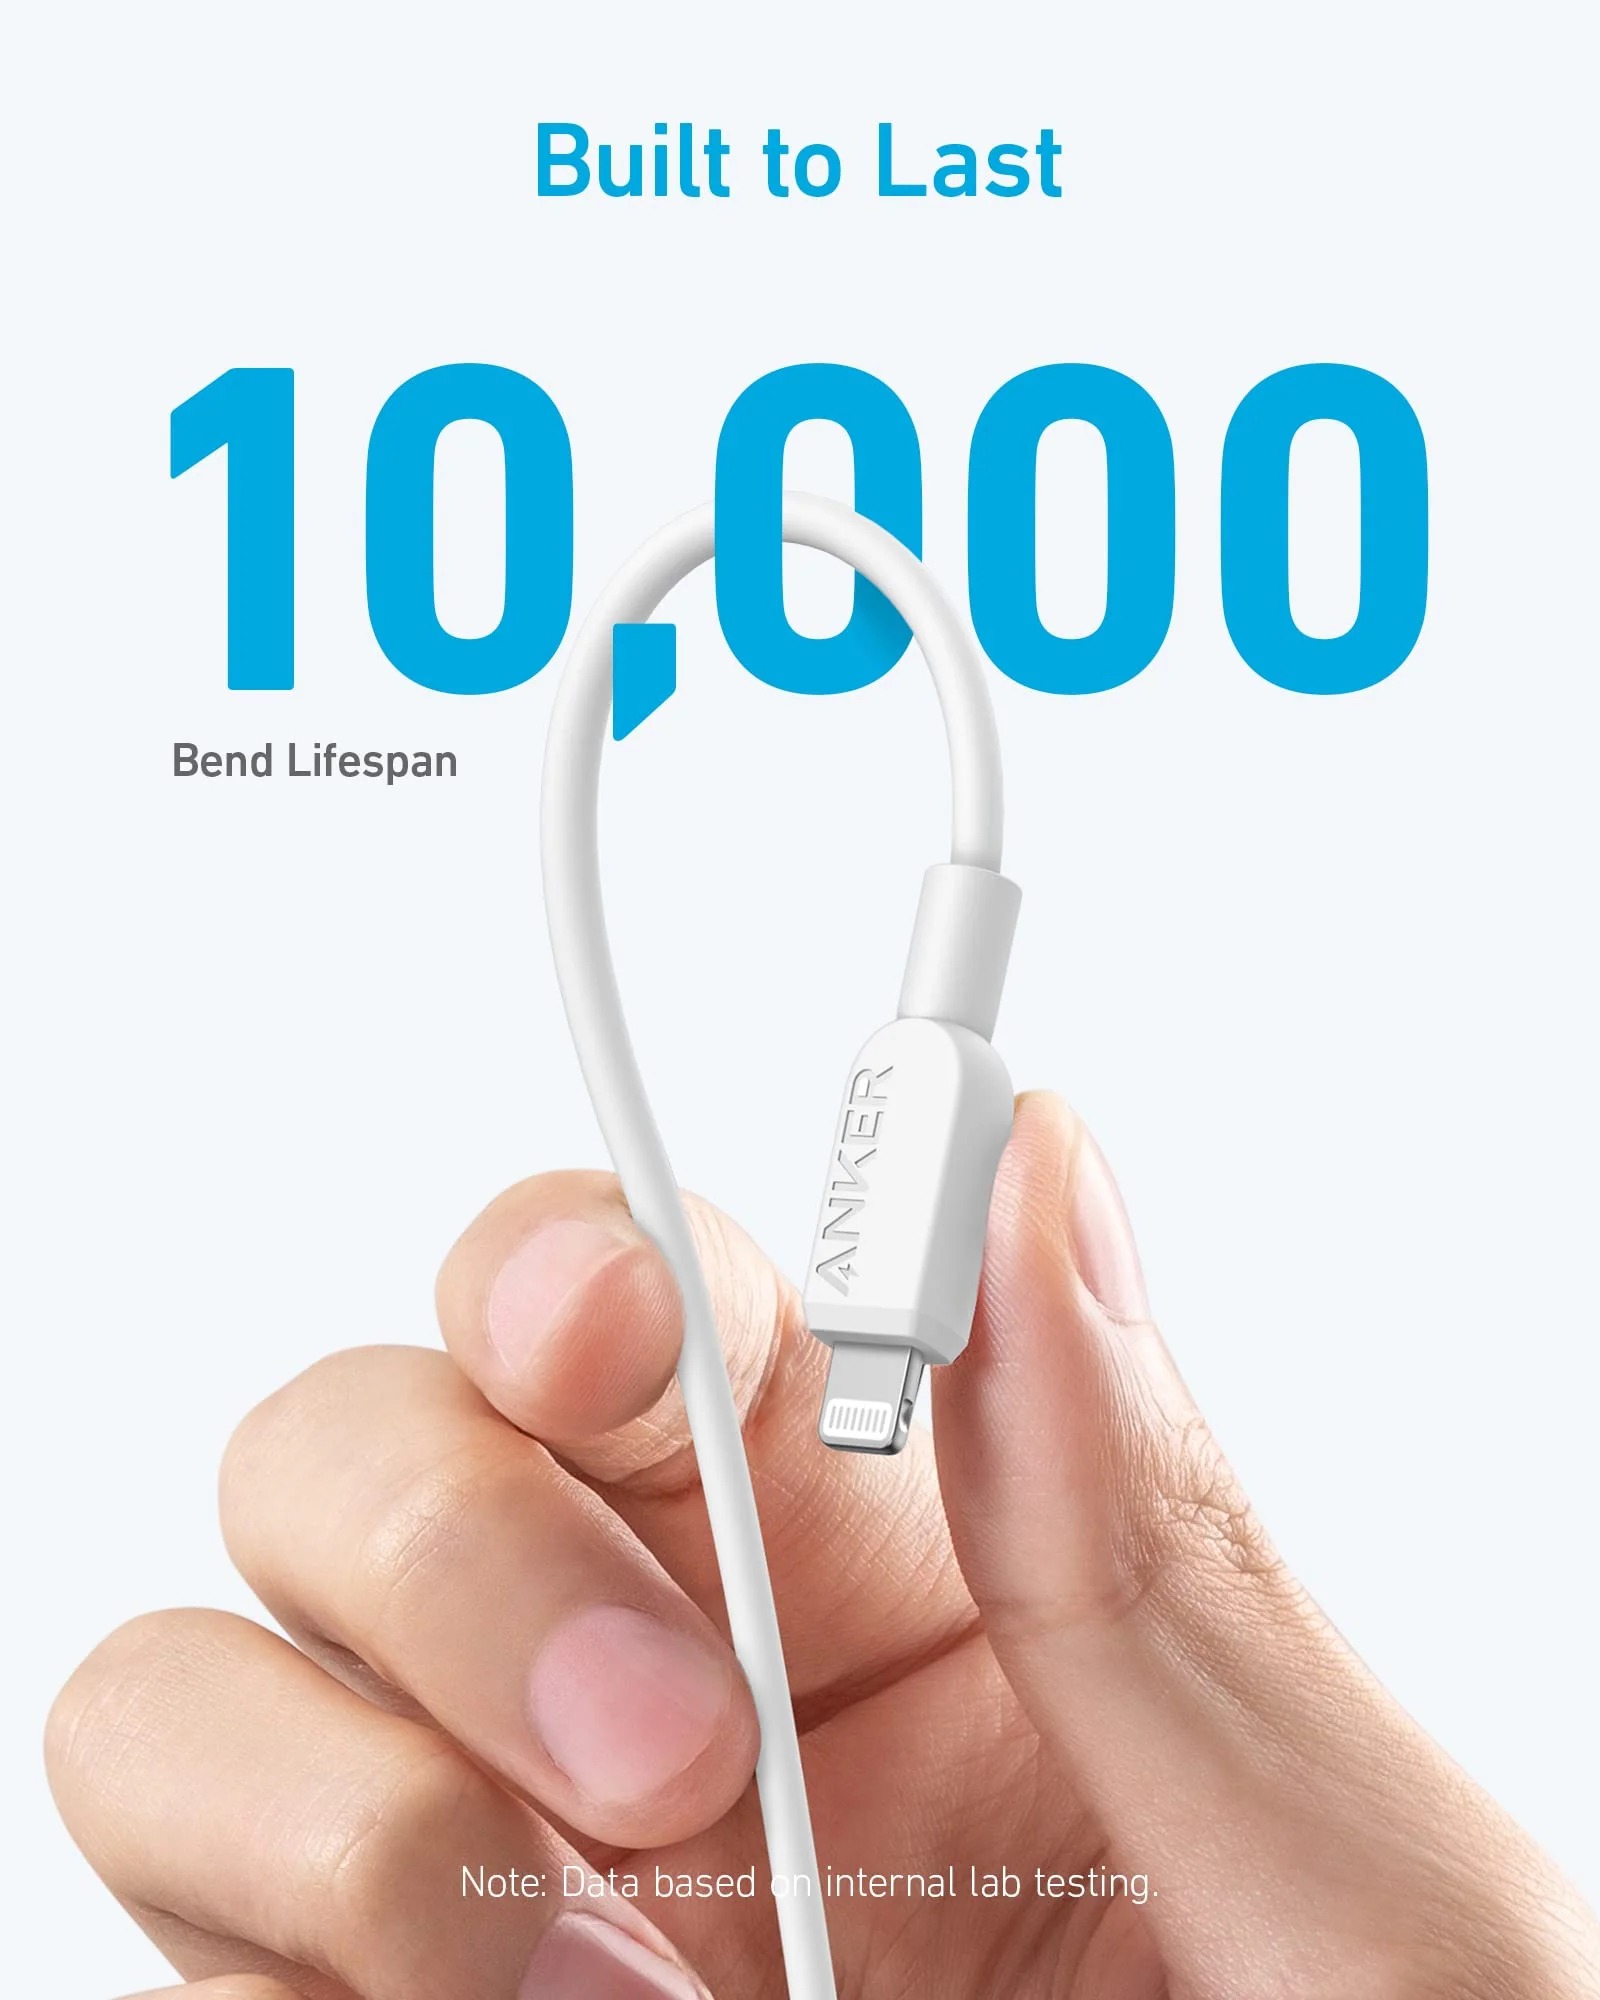 Anker 310 USB C to Lightning Cable (A81A1021): Feature: Fast charge your iPhone: When used with a USB-C fast charger that supports USB PD (sold separately), you can charge your iPhone 14 Pro to 50% in 30 minutes. (*Charging time is based on Anker’s own research) Excellent durability: It has excellent durability that can withstand being bent over 10,000 times, protecting the wires inside the cable from disconnection and allowing you to charge with confidence. Obtained Apple: MFi certification In addition to being Apple MFi certified, it has undergone rigorous quality testing by us, so you can safely and quickly charge your iPhone, iPad, iPod, and other Lightning terminal devices. 